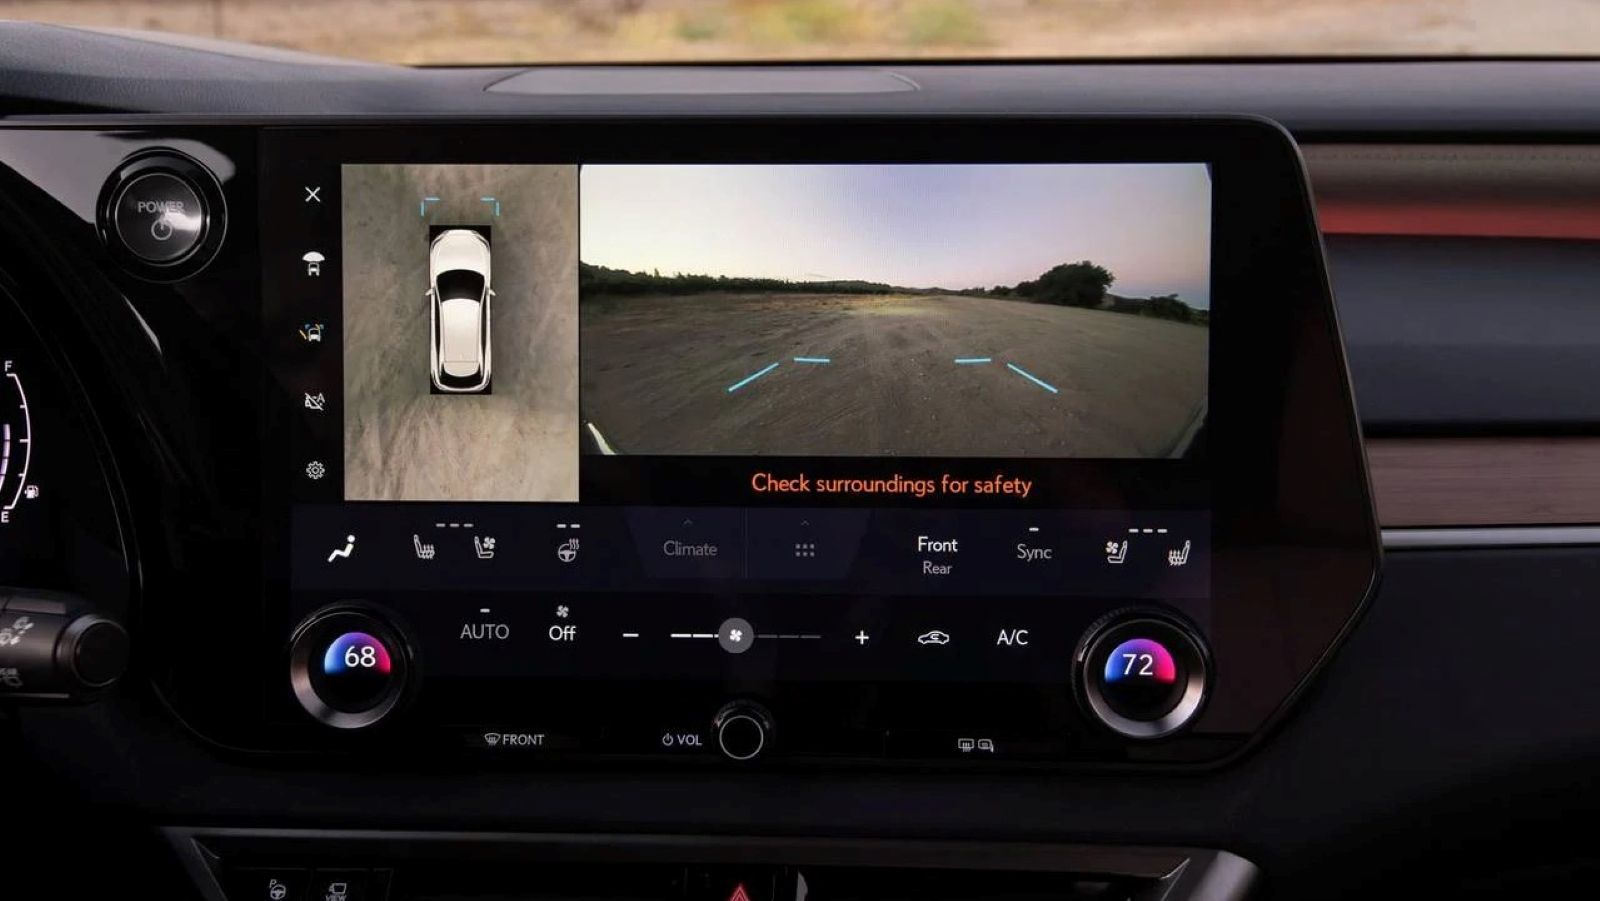 A shot of the 2023 Lexus RX 350h infotainment displaying safety information